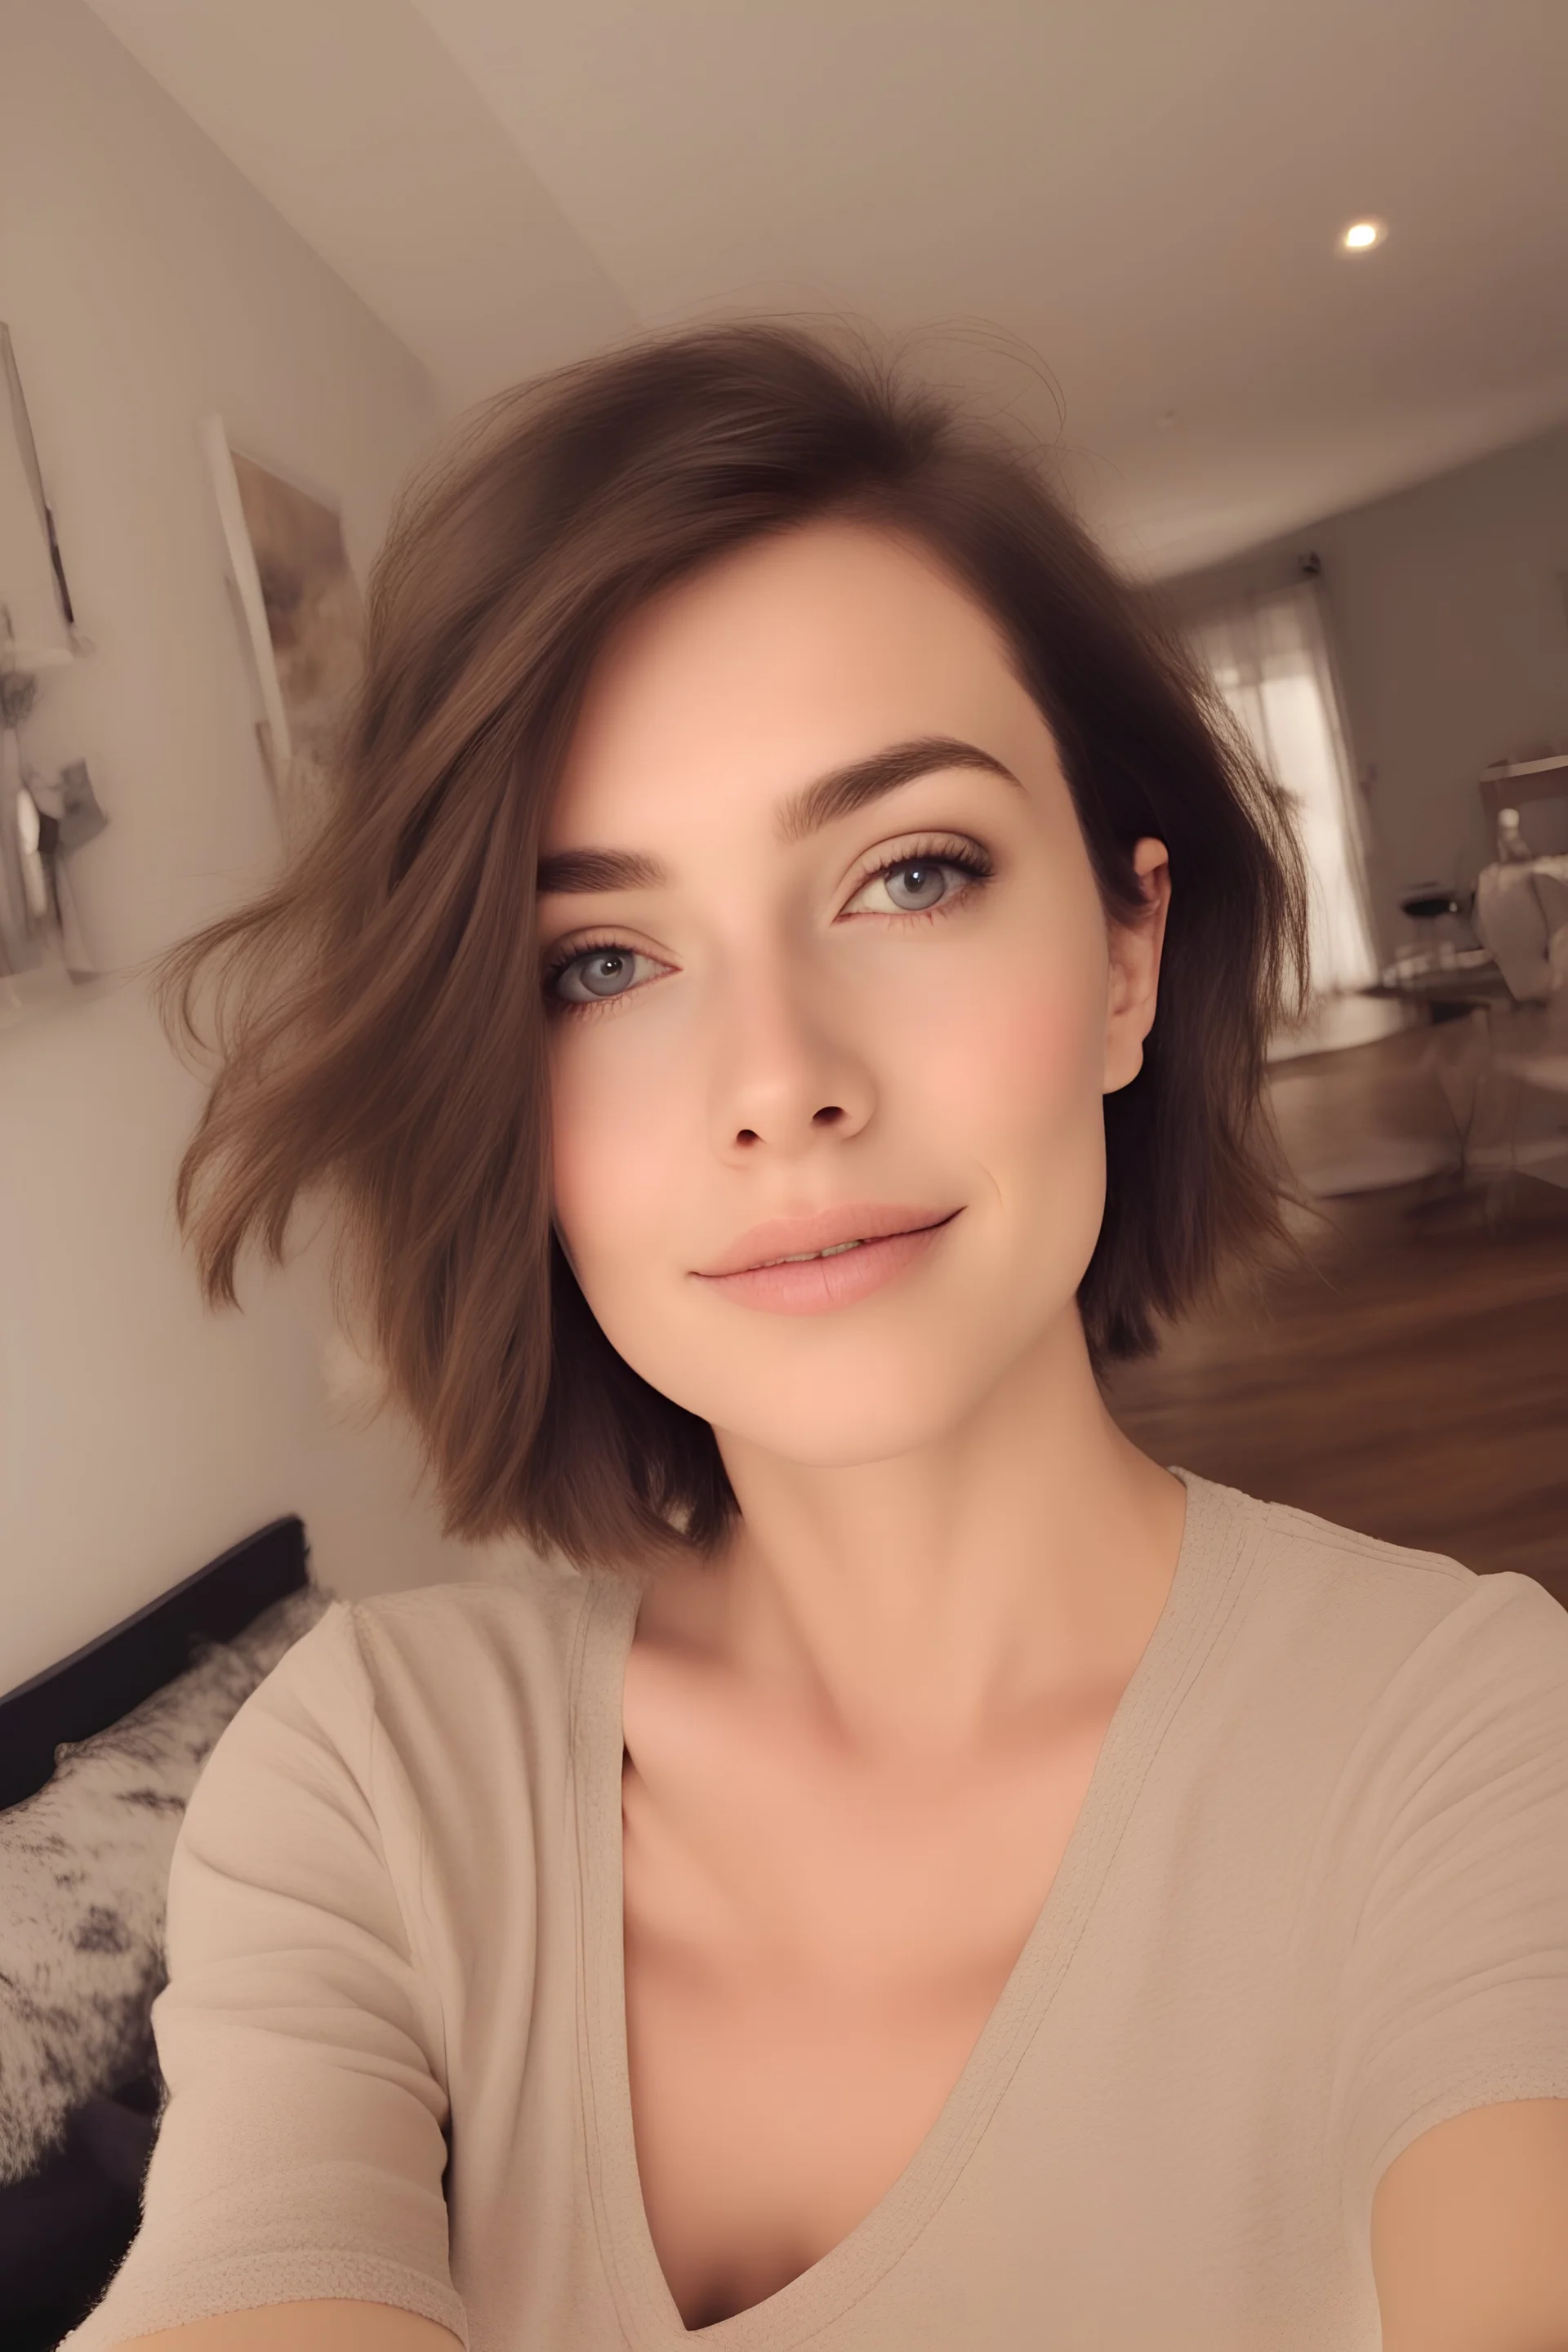 A selfie of a brunette woman with a round face, short hair and small eyes taken at home.